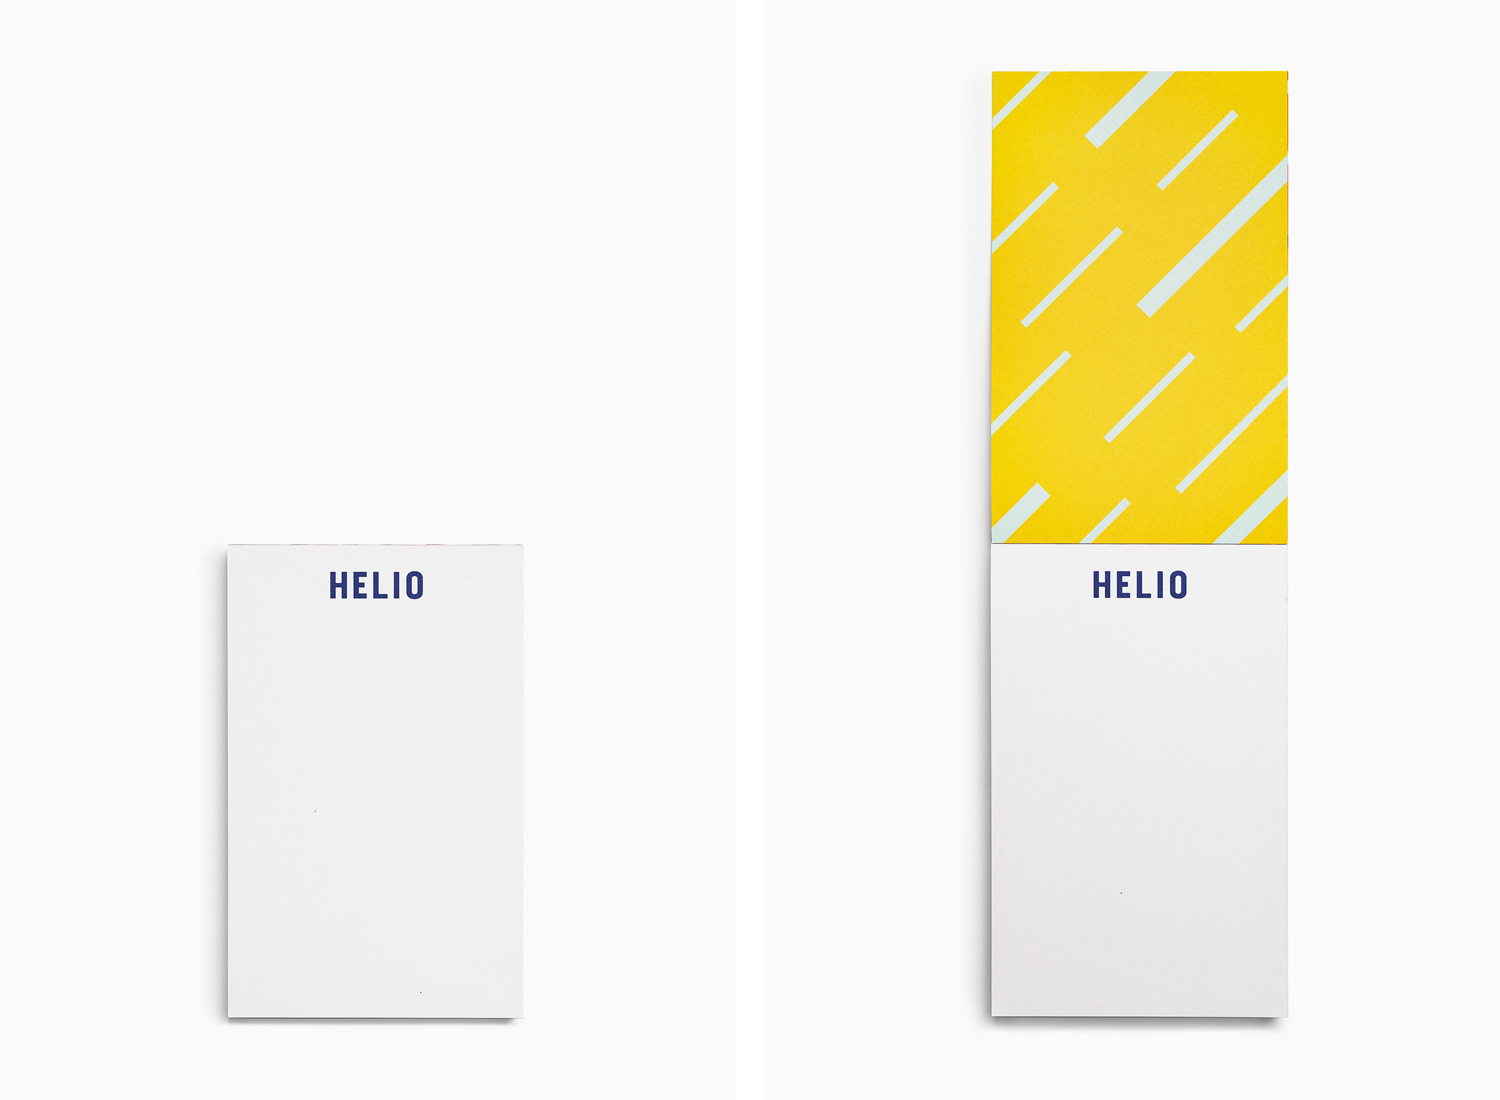 Visual identity, pattern and notepads by Bedow for Stockholm-based co-working space Helio